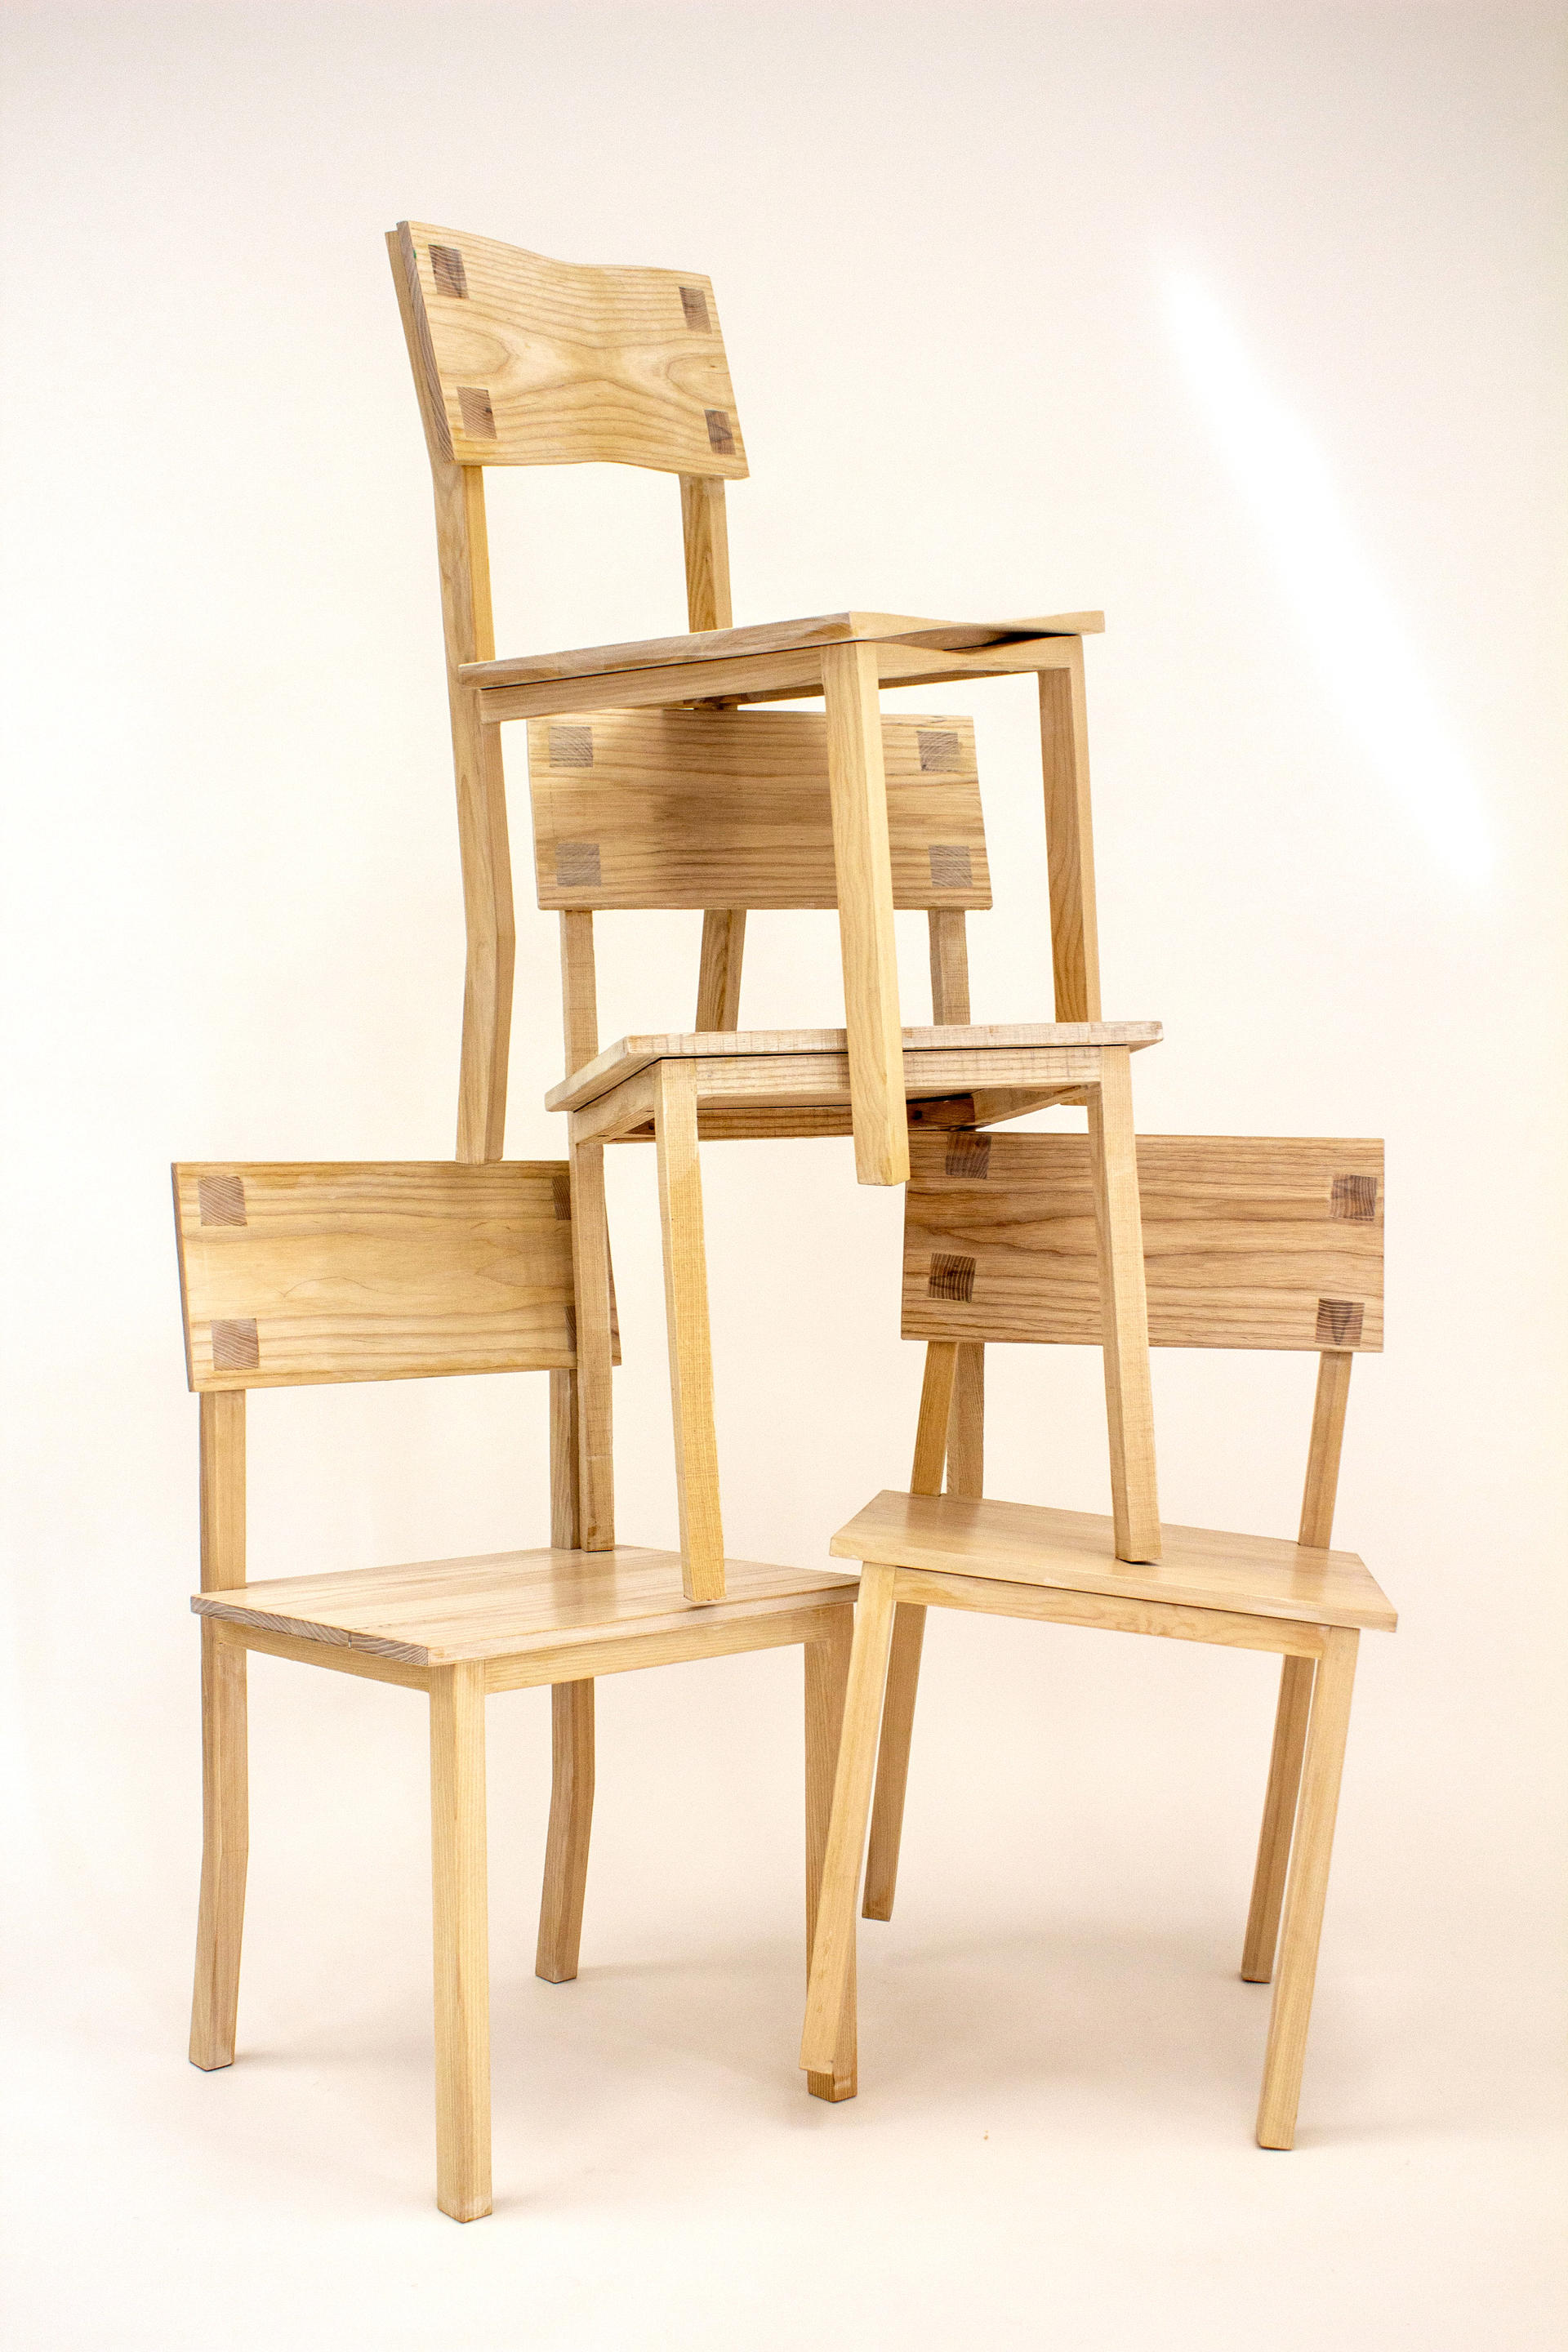 Group of dining chairs upon one another